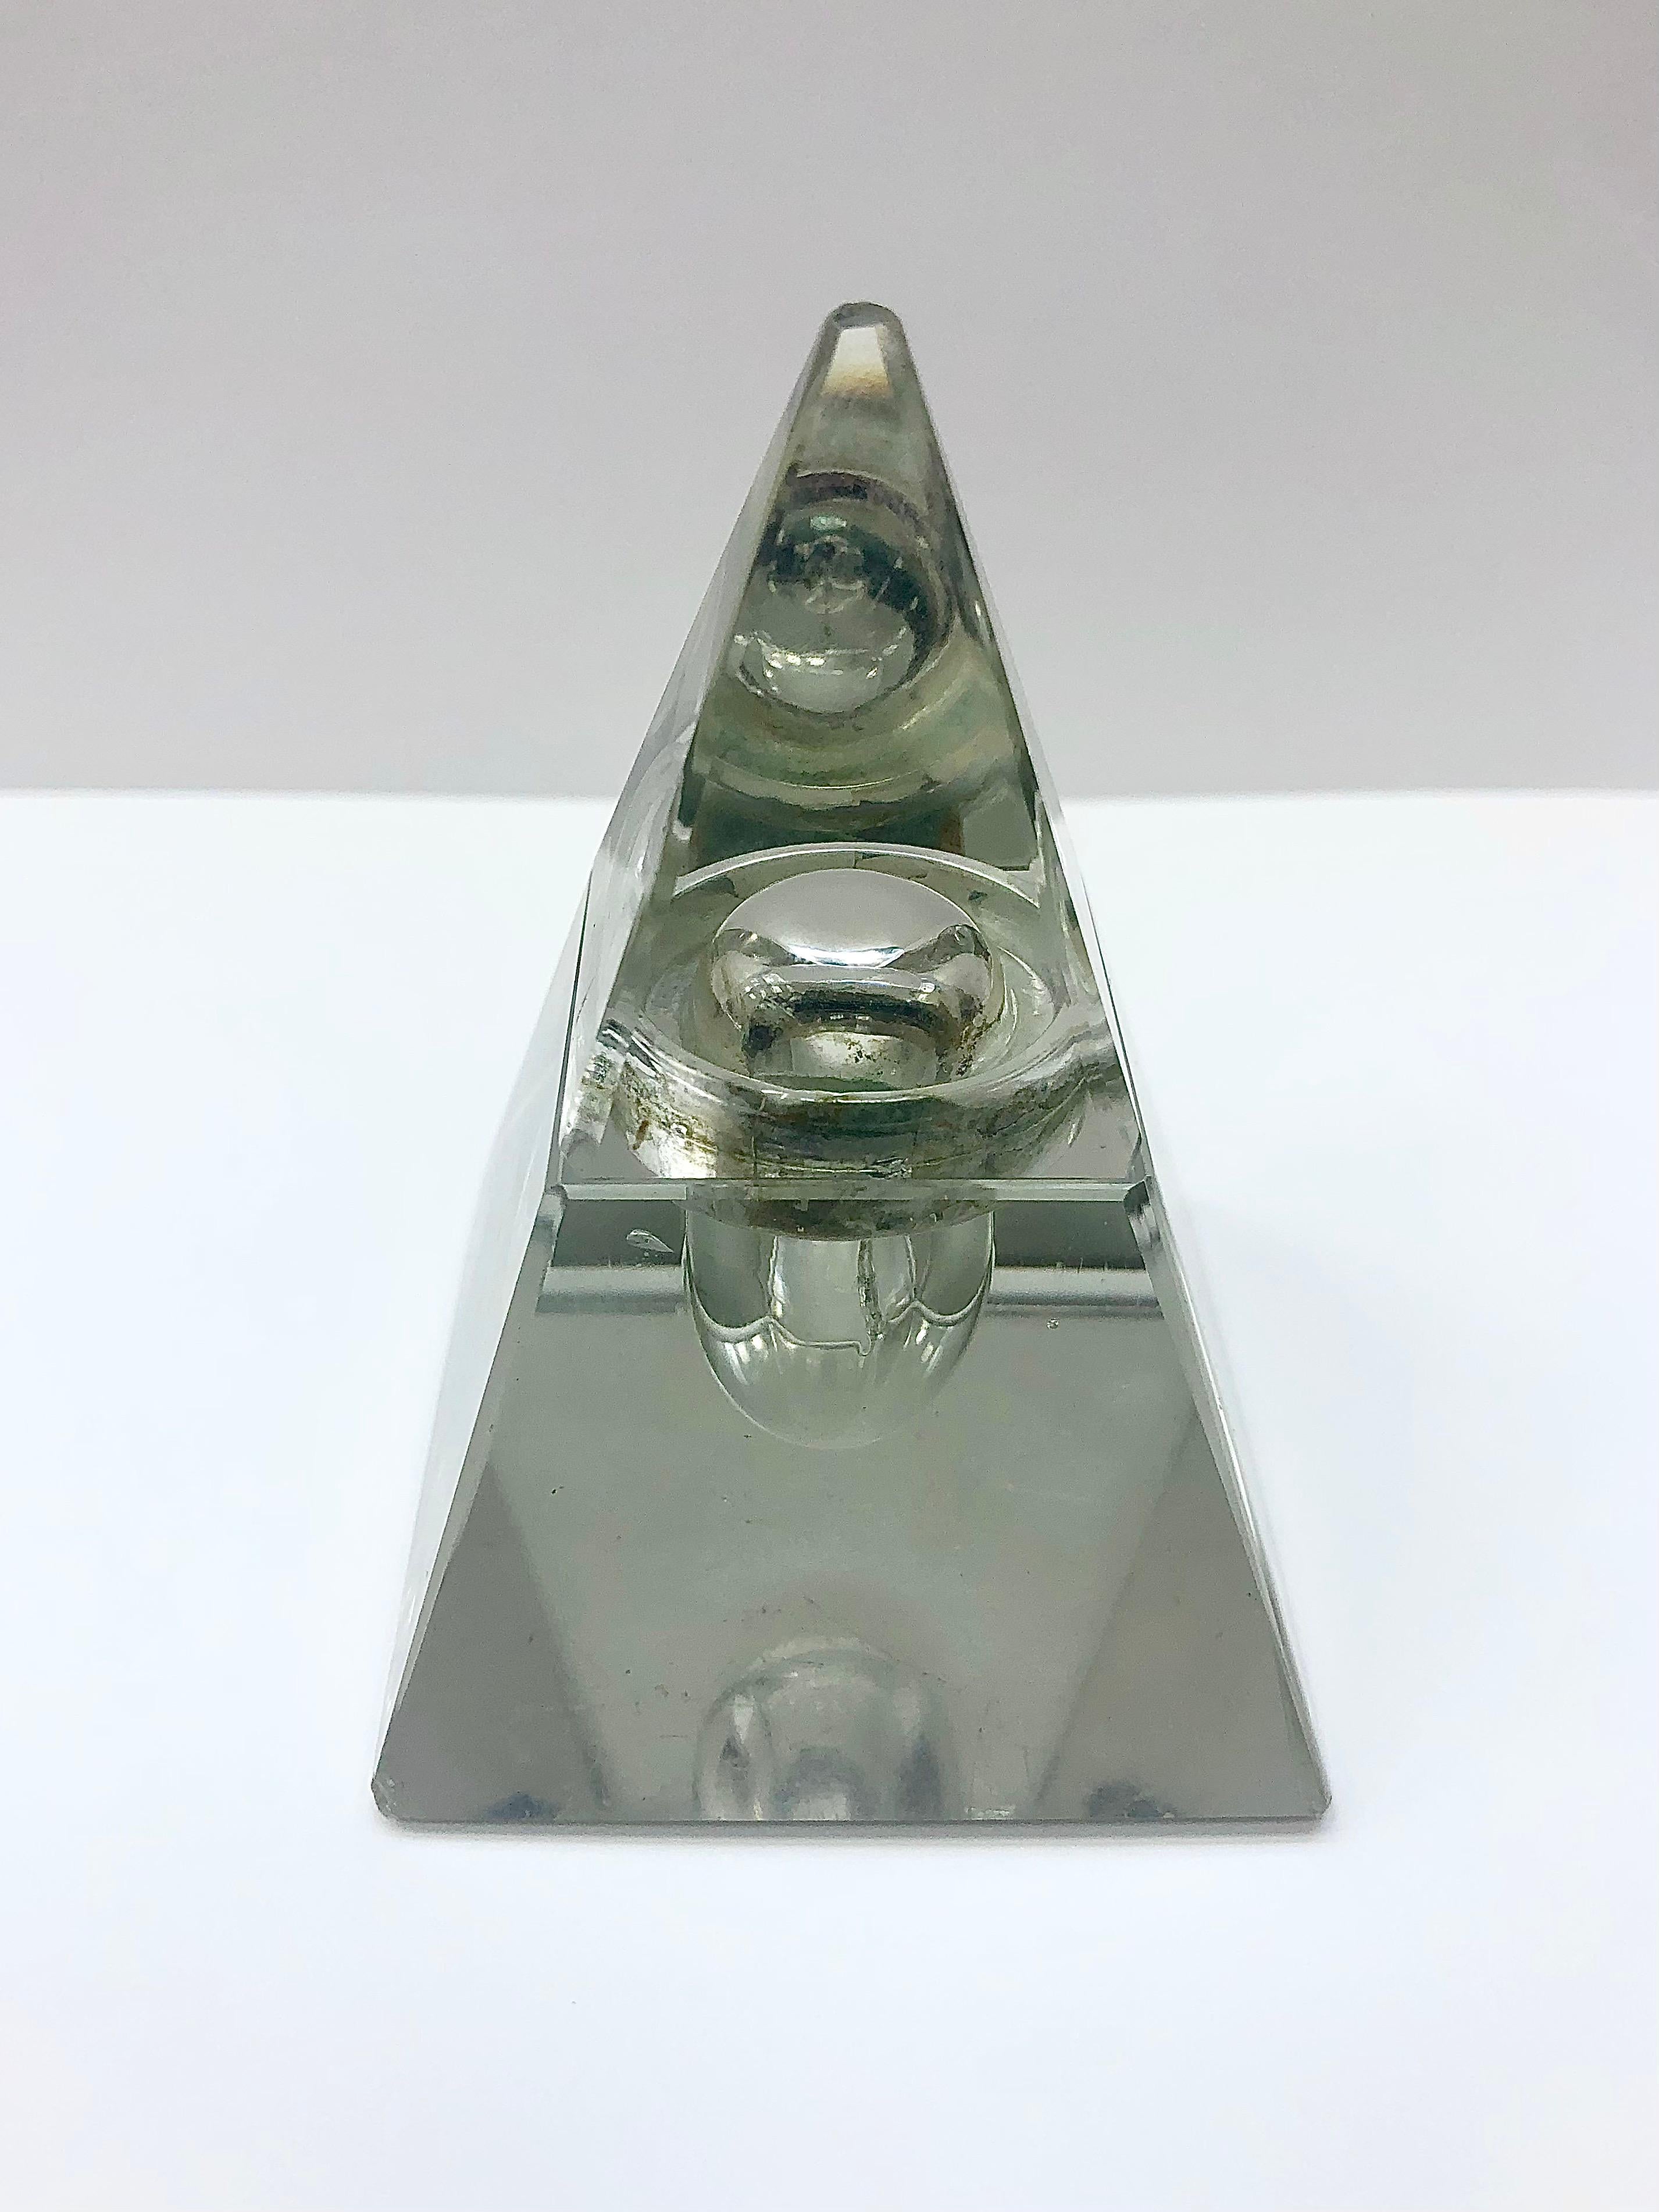 Antique, pyramid shape, crystal inkwell with a brass collar. English 1870. Very nice decorative piece for a desk or collector.